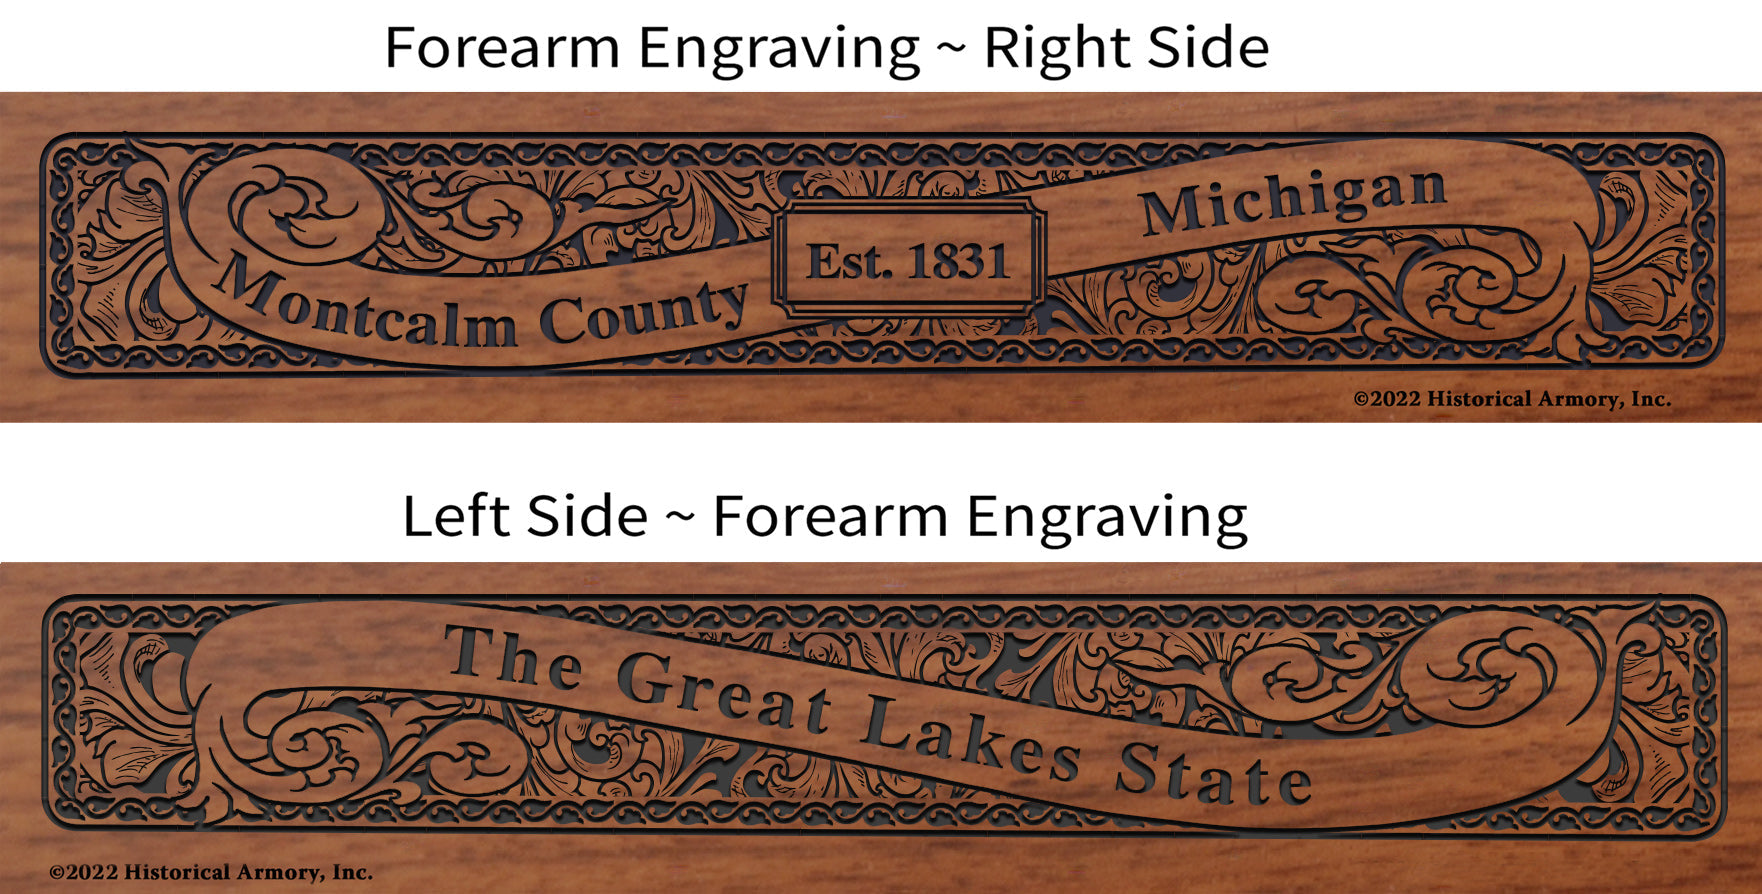 Montcalm County Michigan Engraved Rifle Forearm